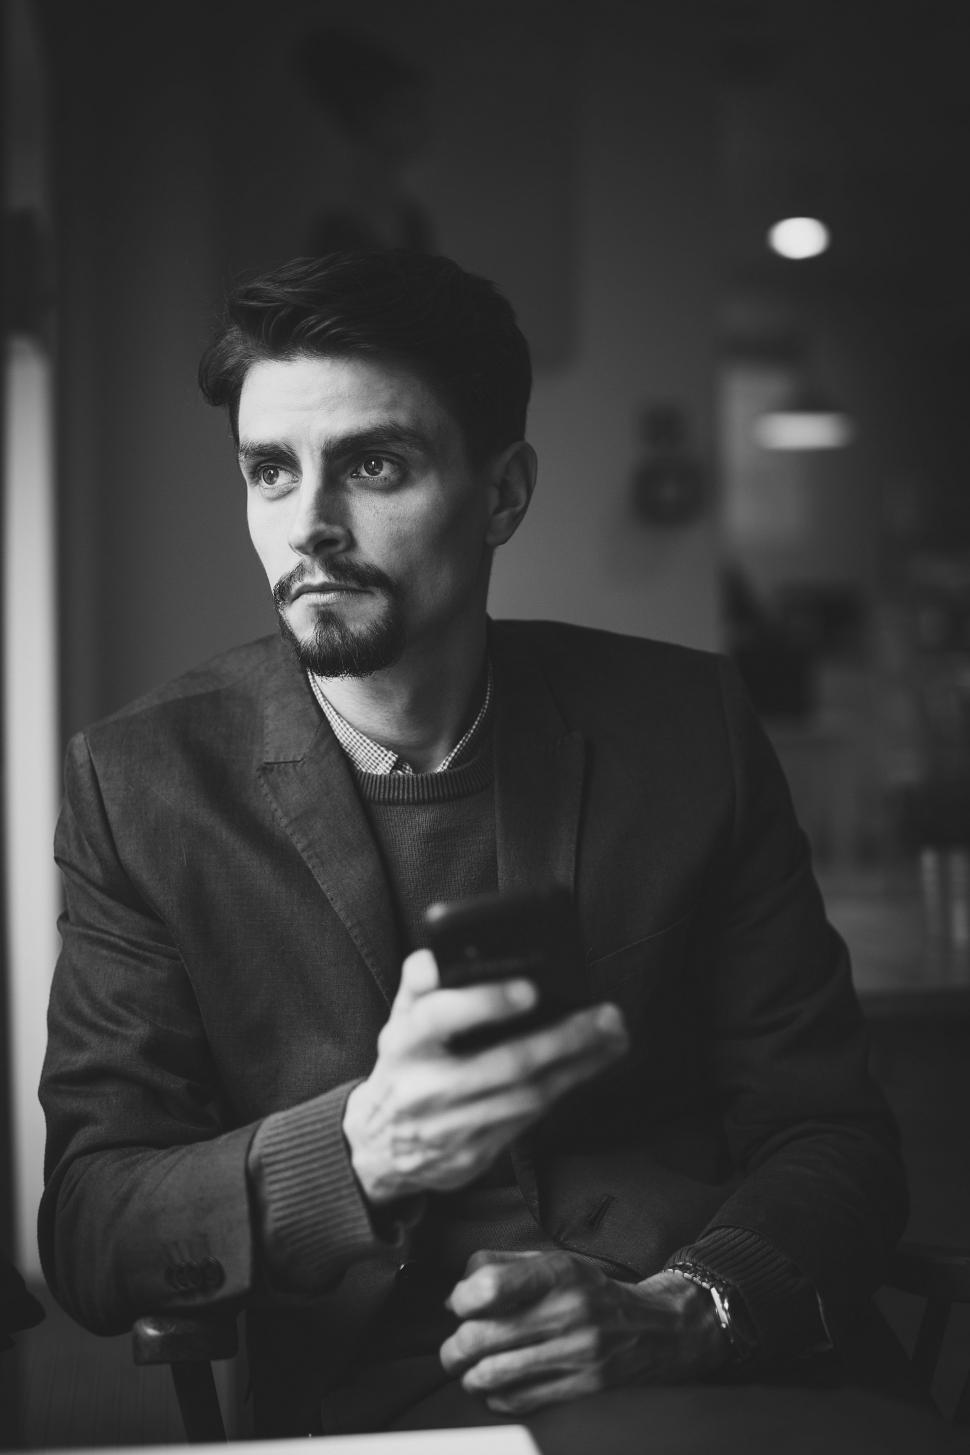 Free Image of Indoor View of young Man sitting and holding smartphone while looking away  